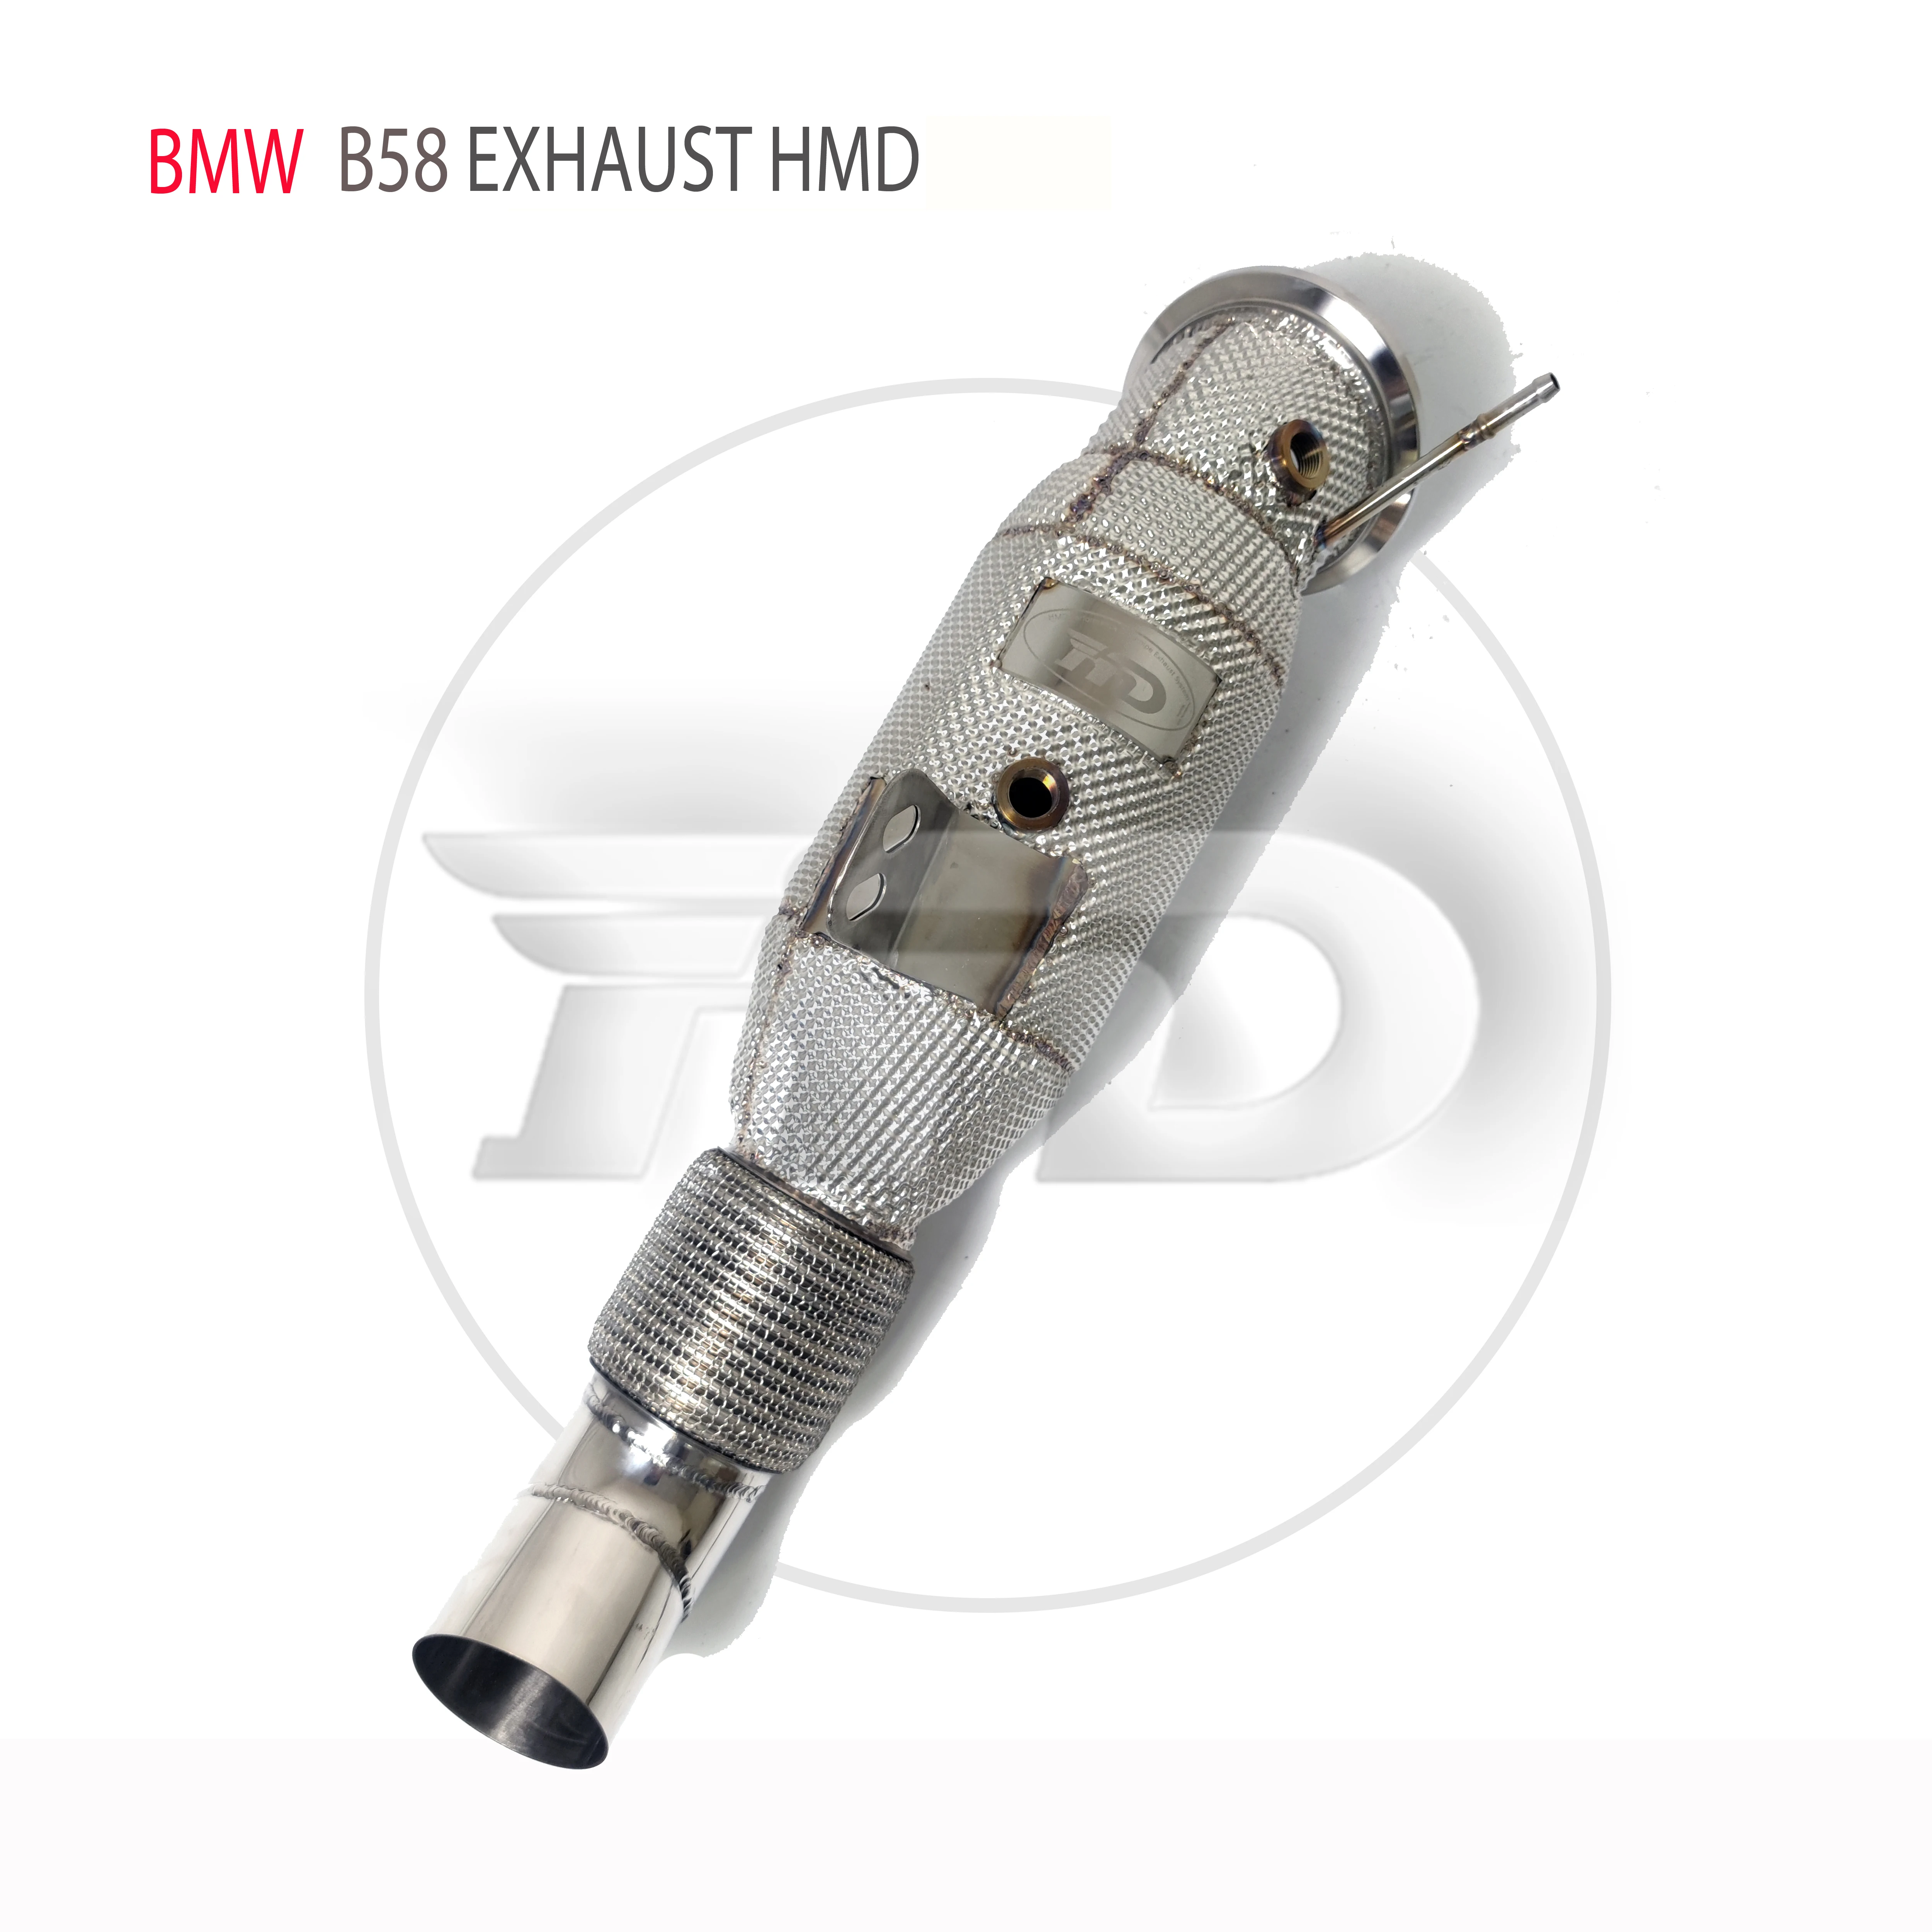 

HMD Exhaust System High Flow Performance Downpipe for BMW 540i G30 B58 Engine 3.0T Car Accessories With Cat Pipe